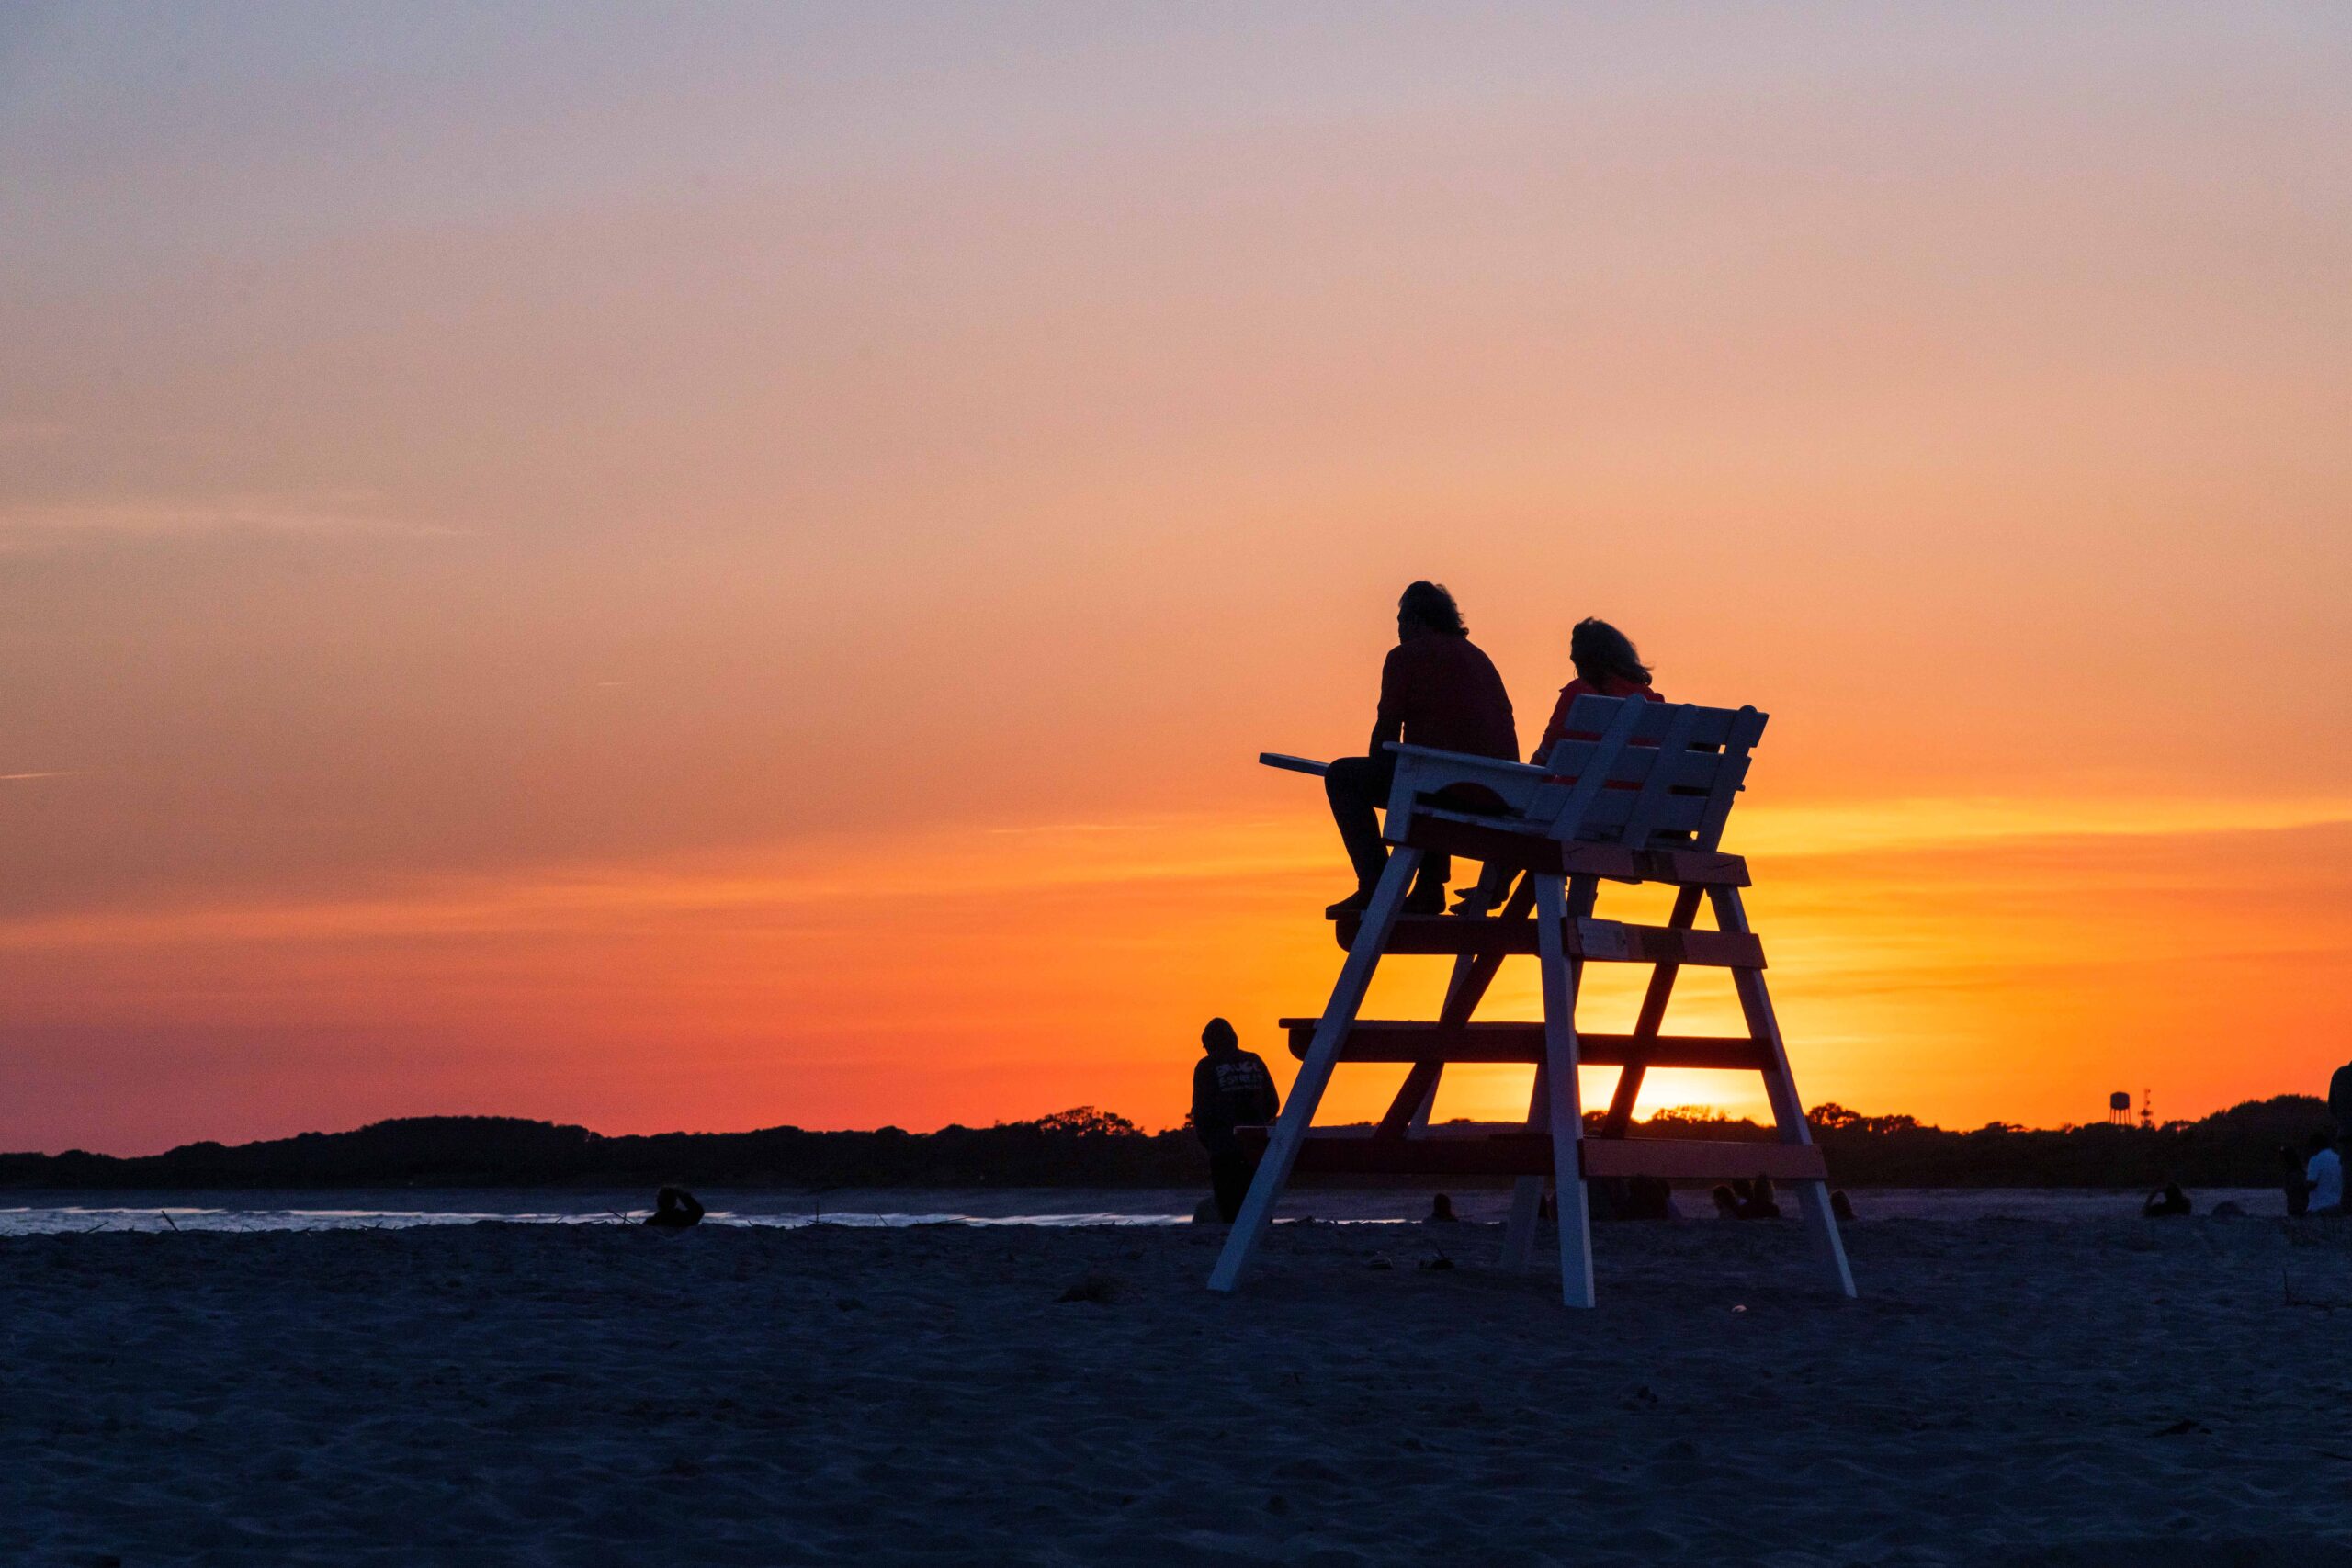 Two people sitting on a lifeguard stand silhouetted by sunset at the beach